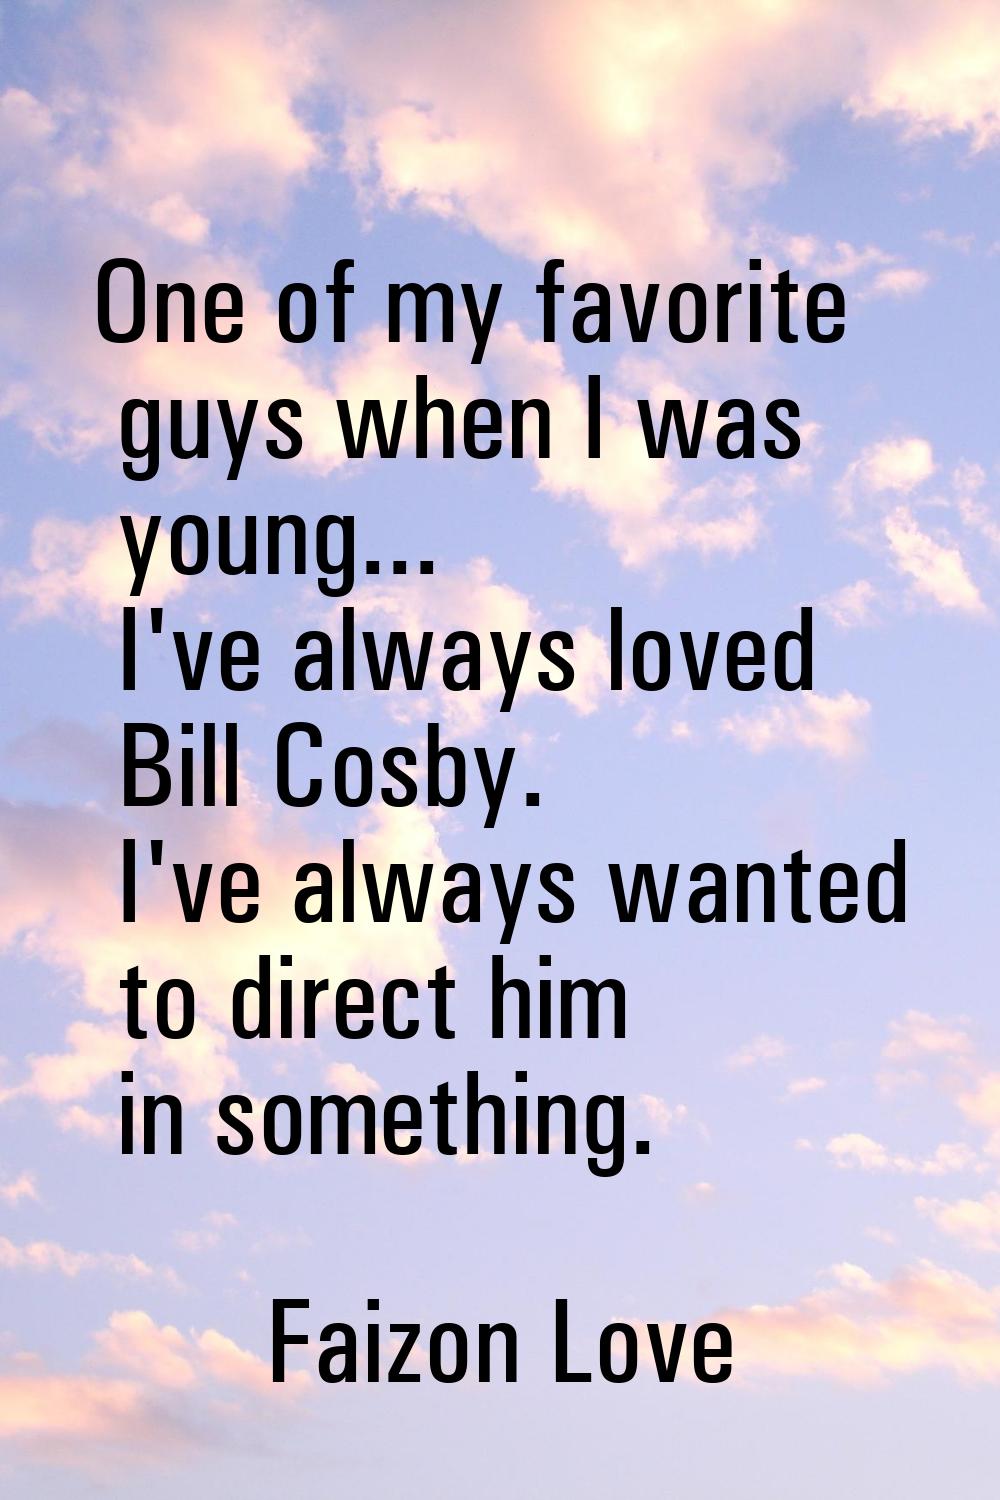 One of my favorite guys when I was young... I've always loved Bill Cosby. I've always wanted to dir